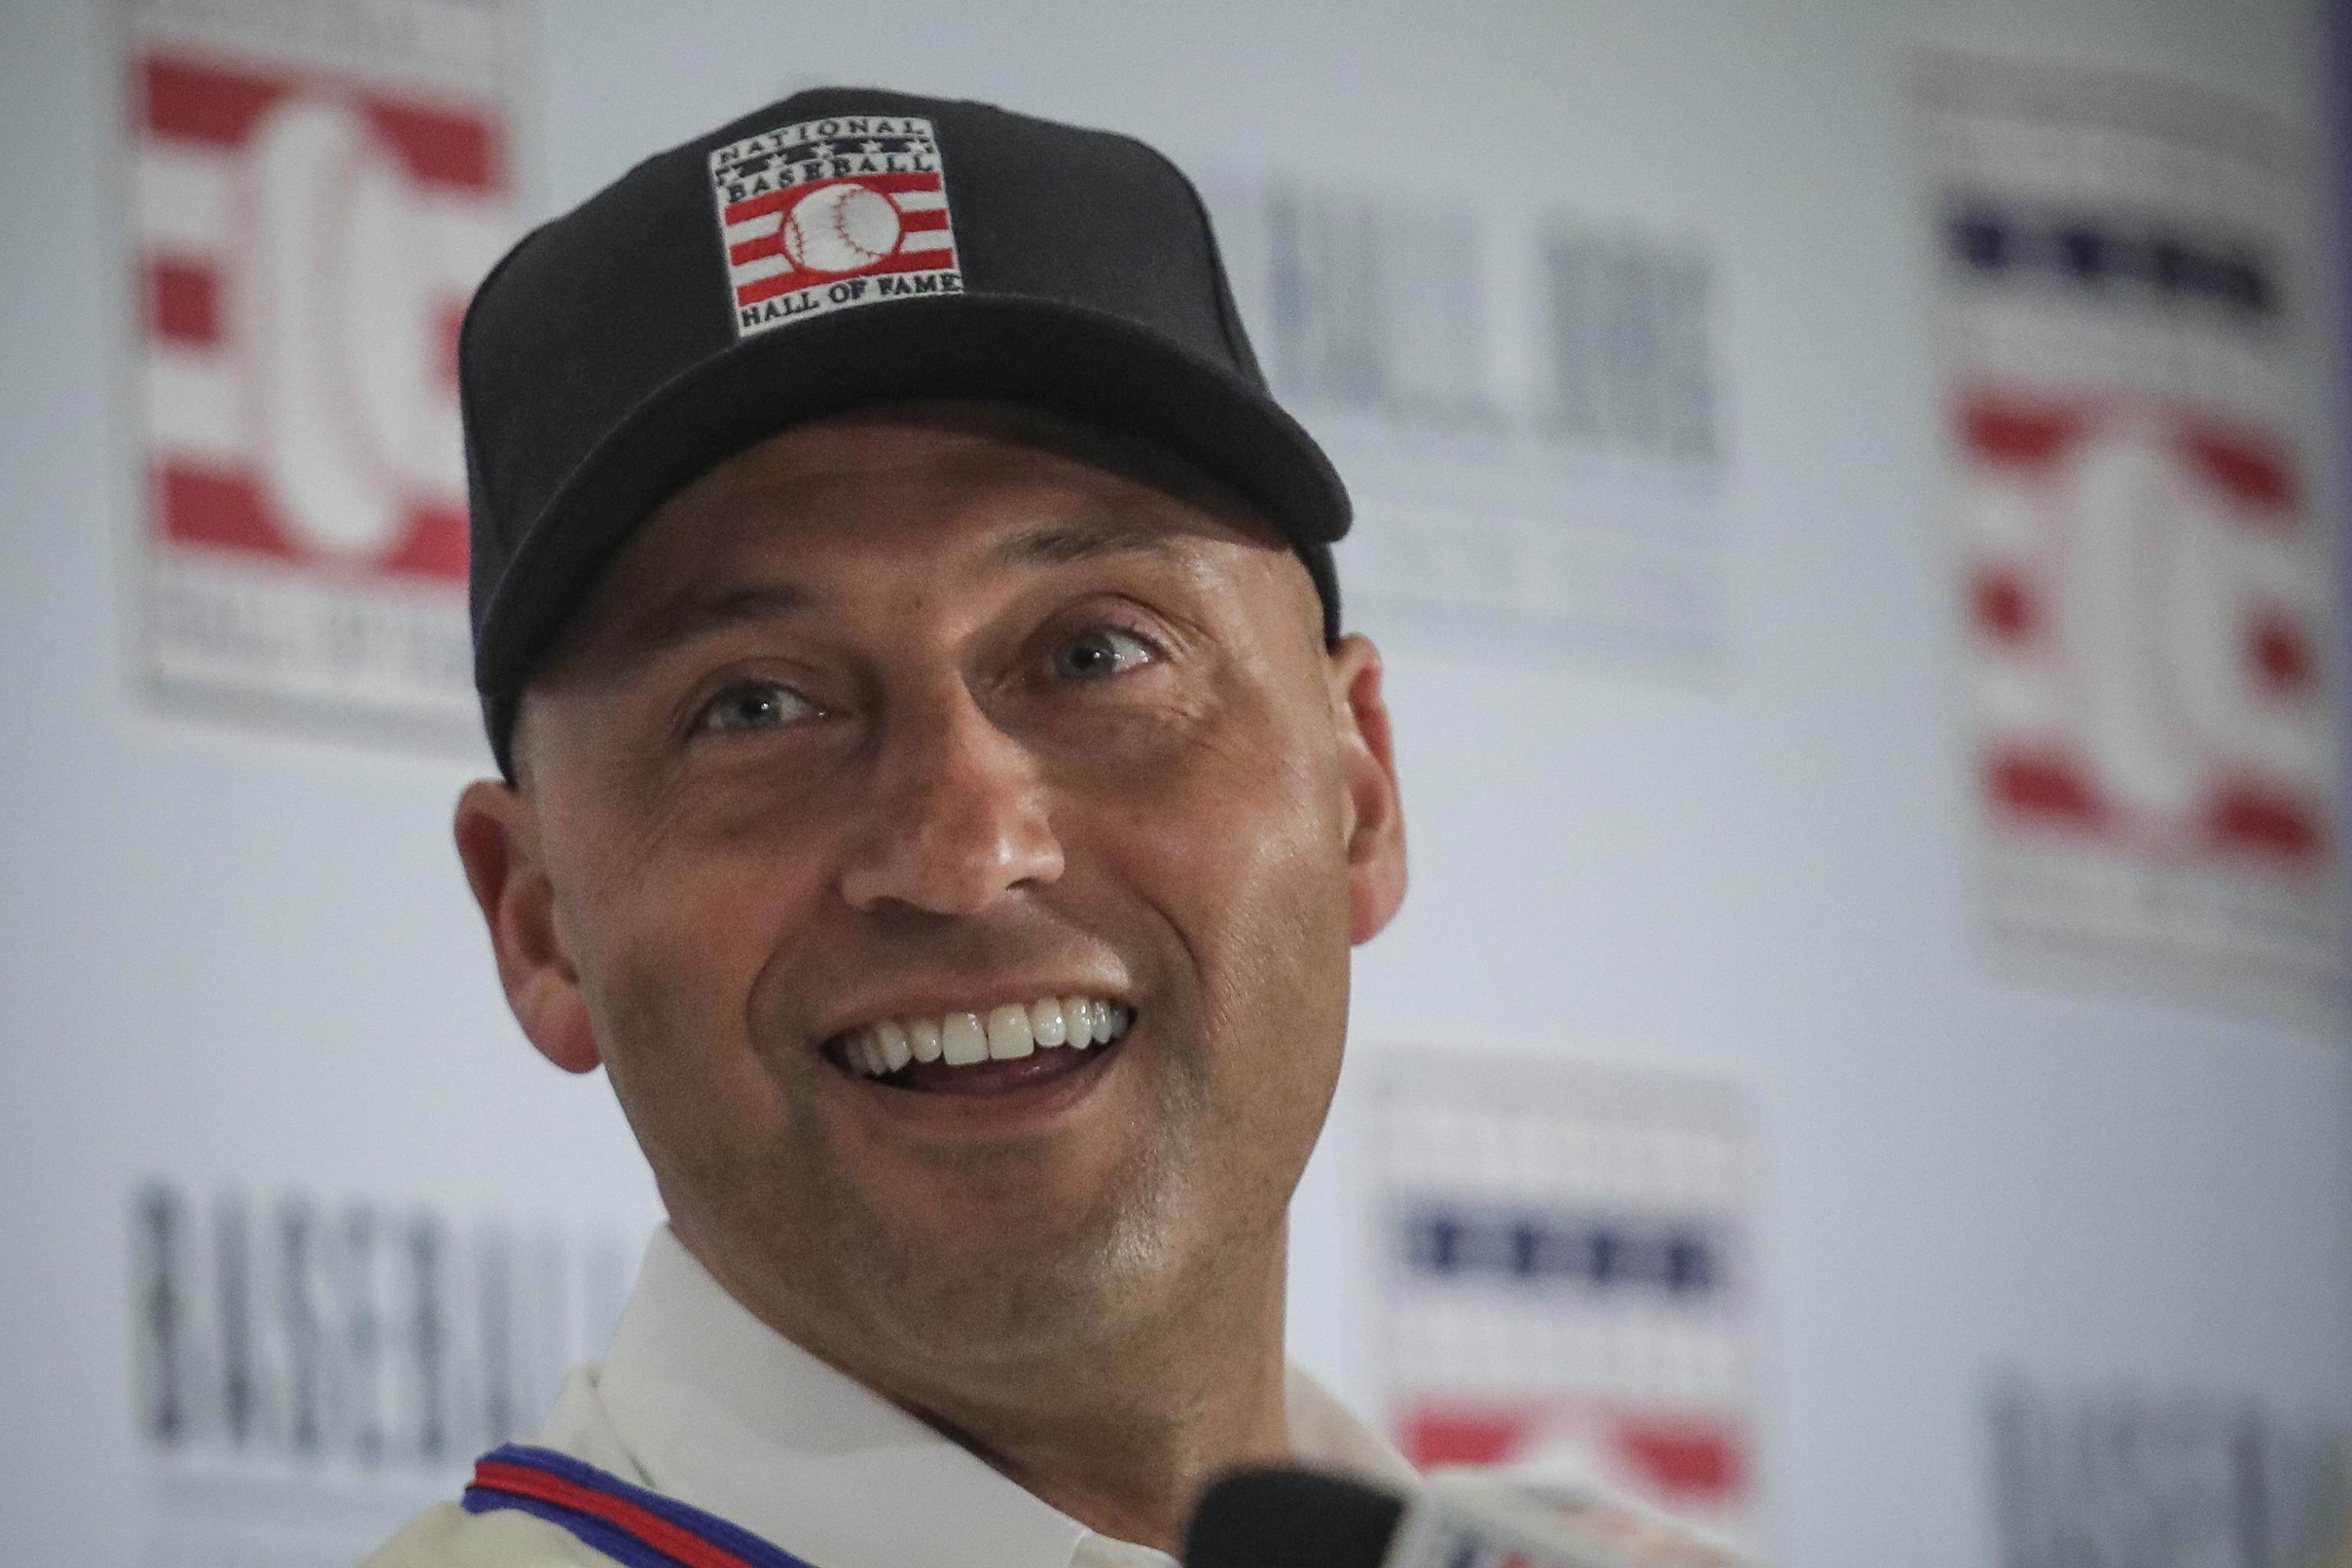 Derek Jeter joins the Baseball Hall of Fame today and had some of